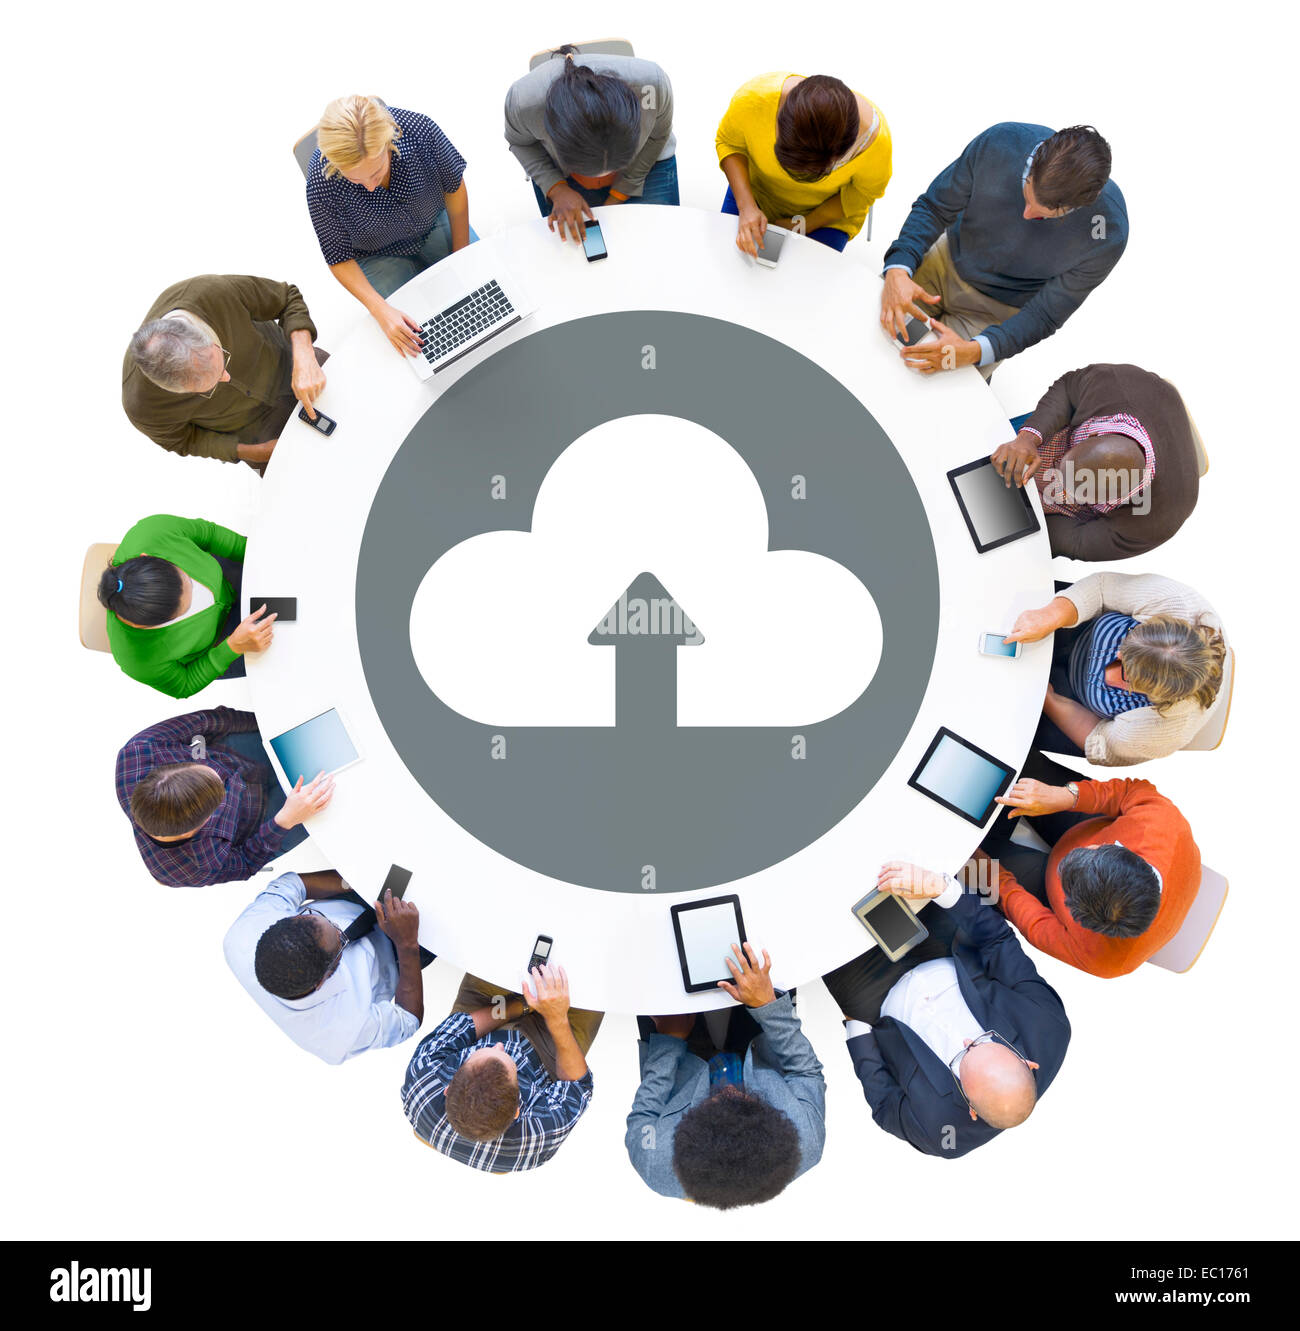 Group of People Using Digital Devices with Cloud Symbol Stock Photo